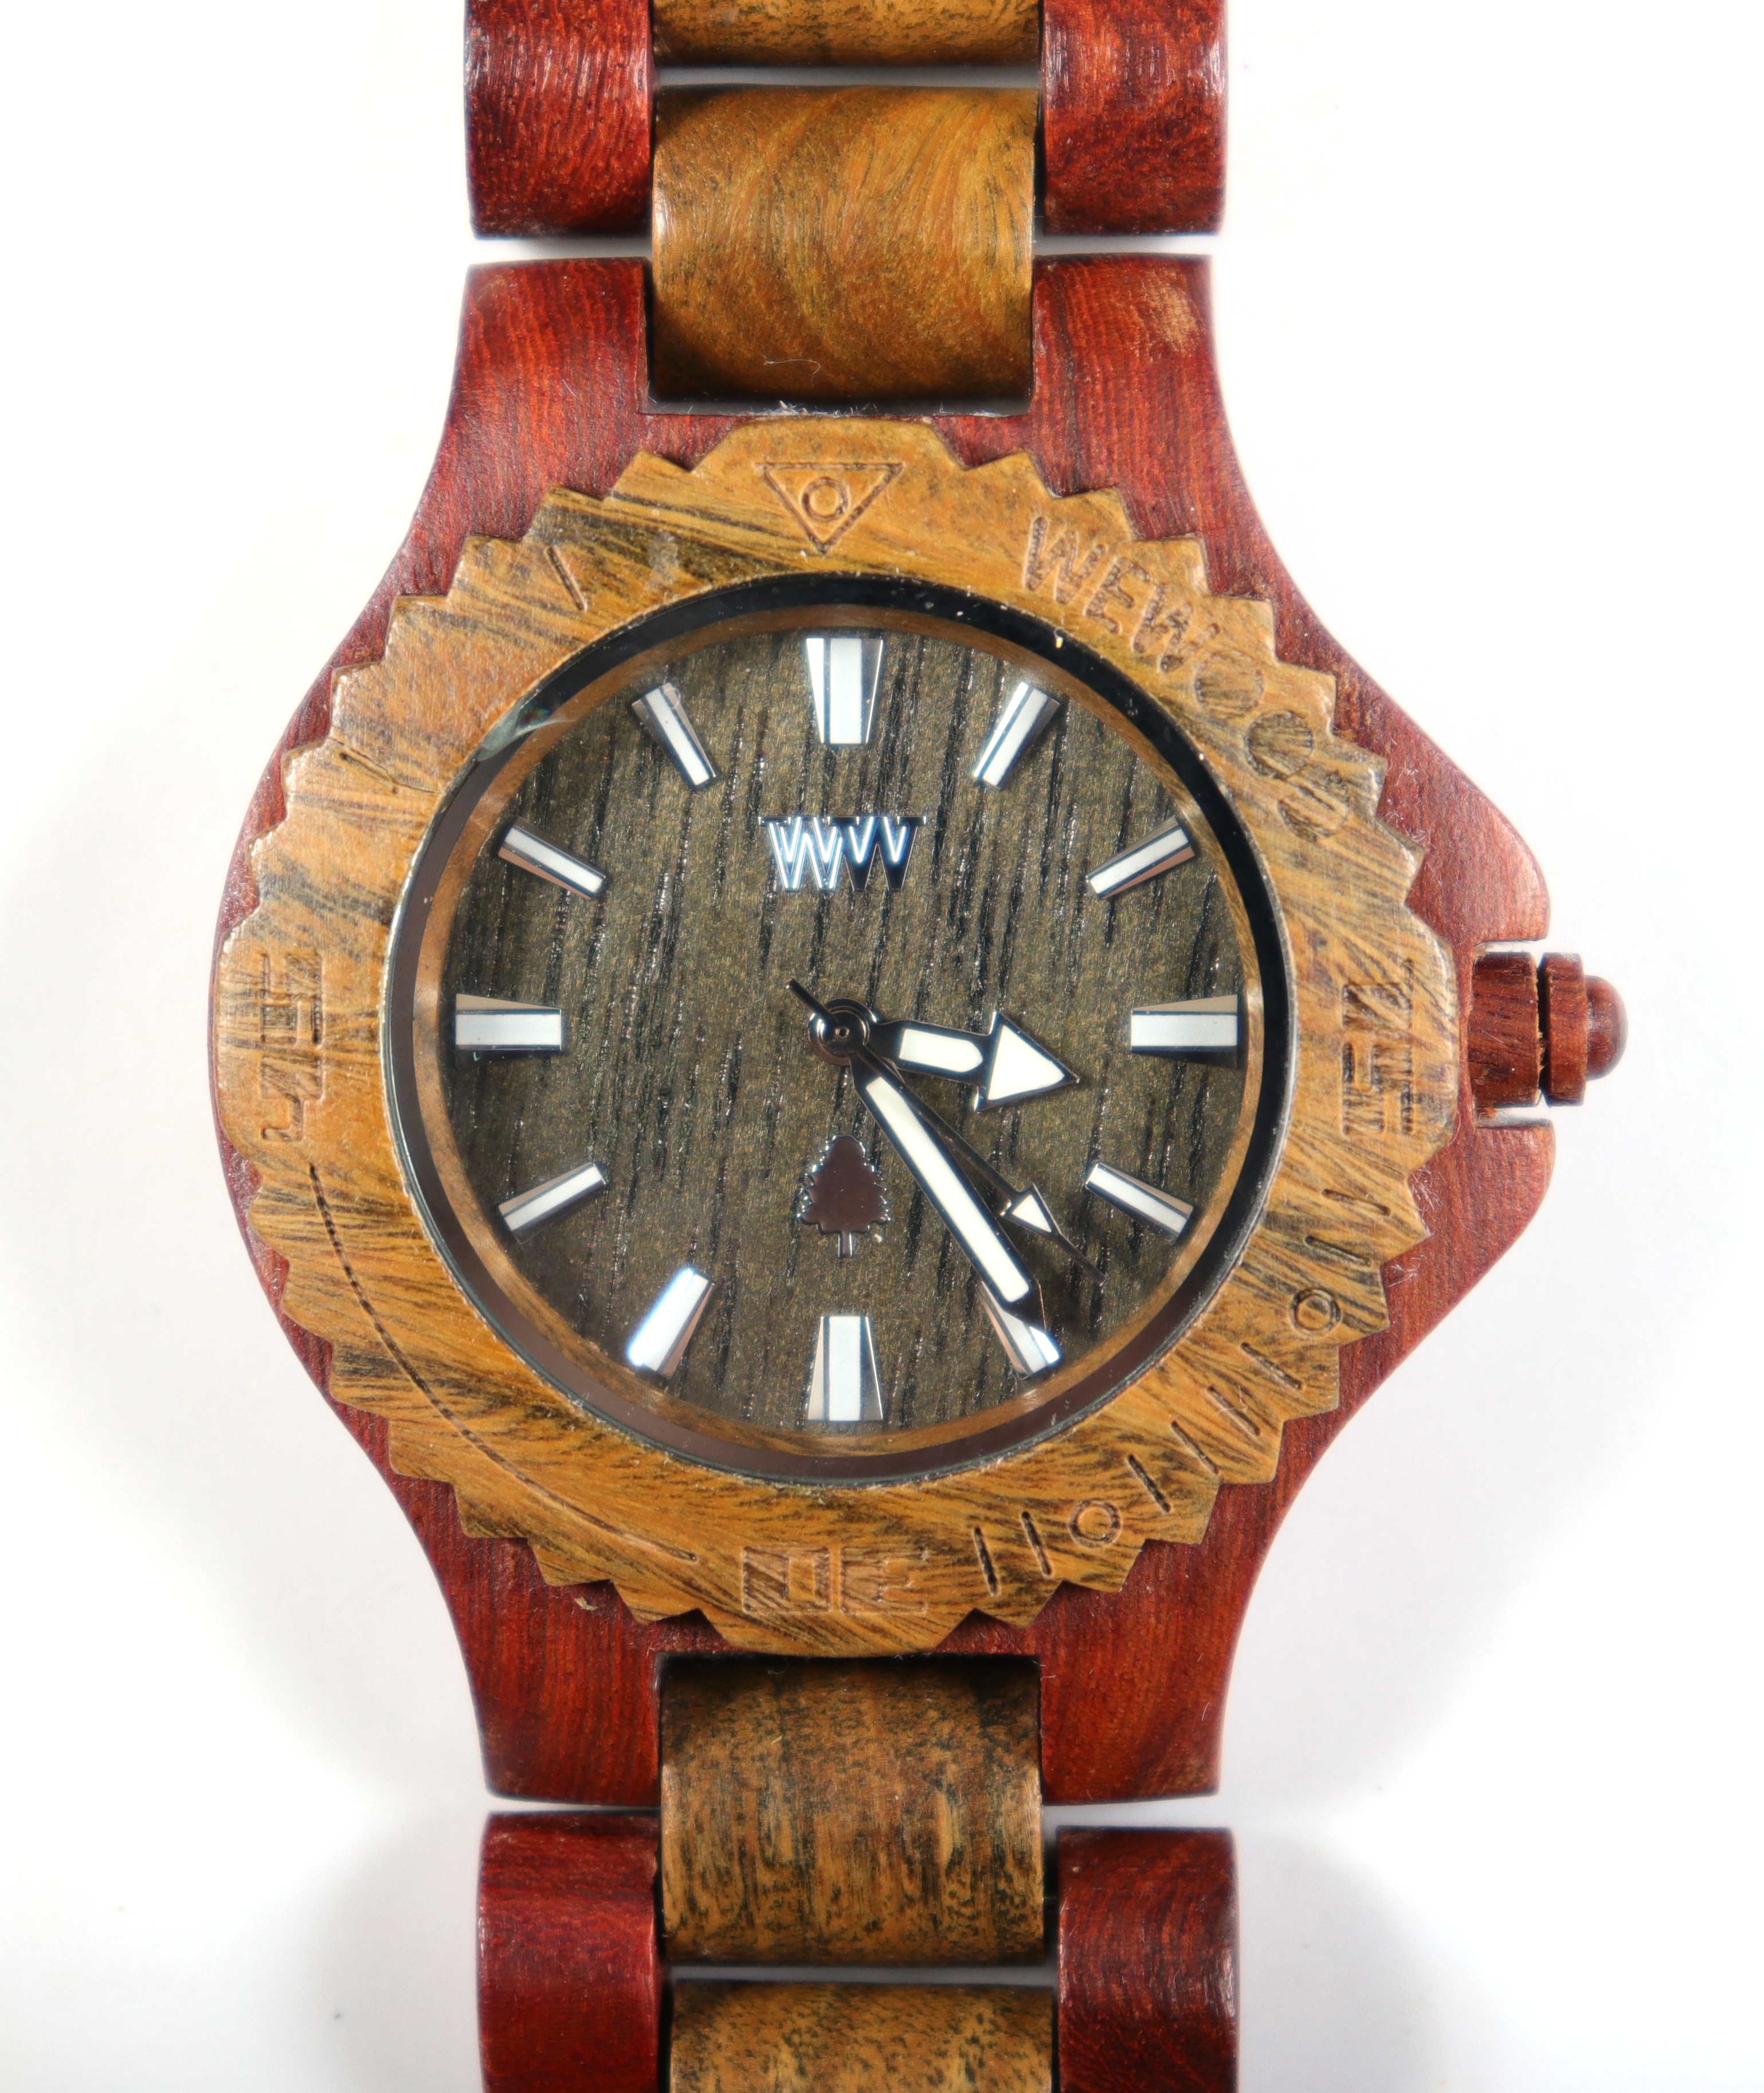 WEWOOD DATE "CHOCOLATE" WOODEN